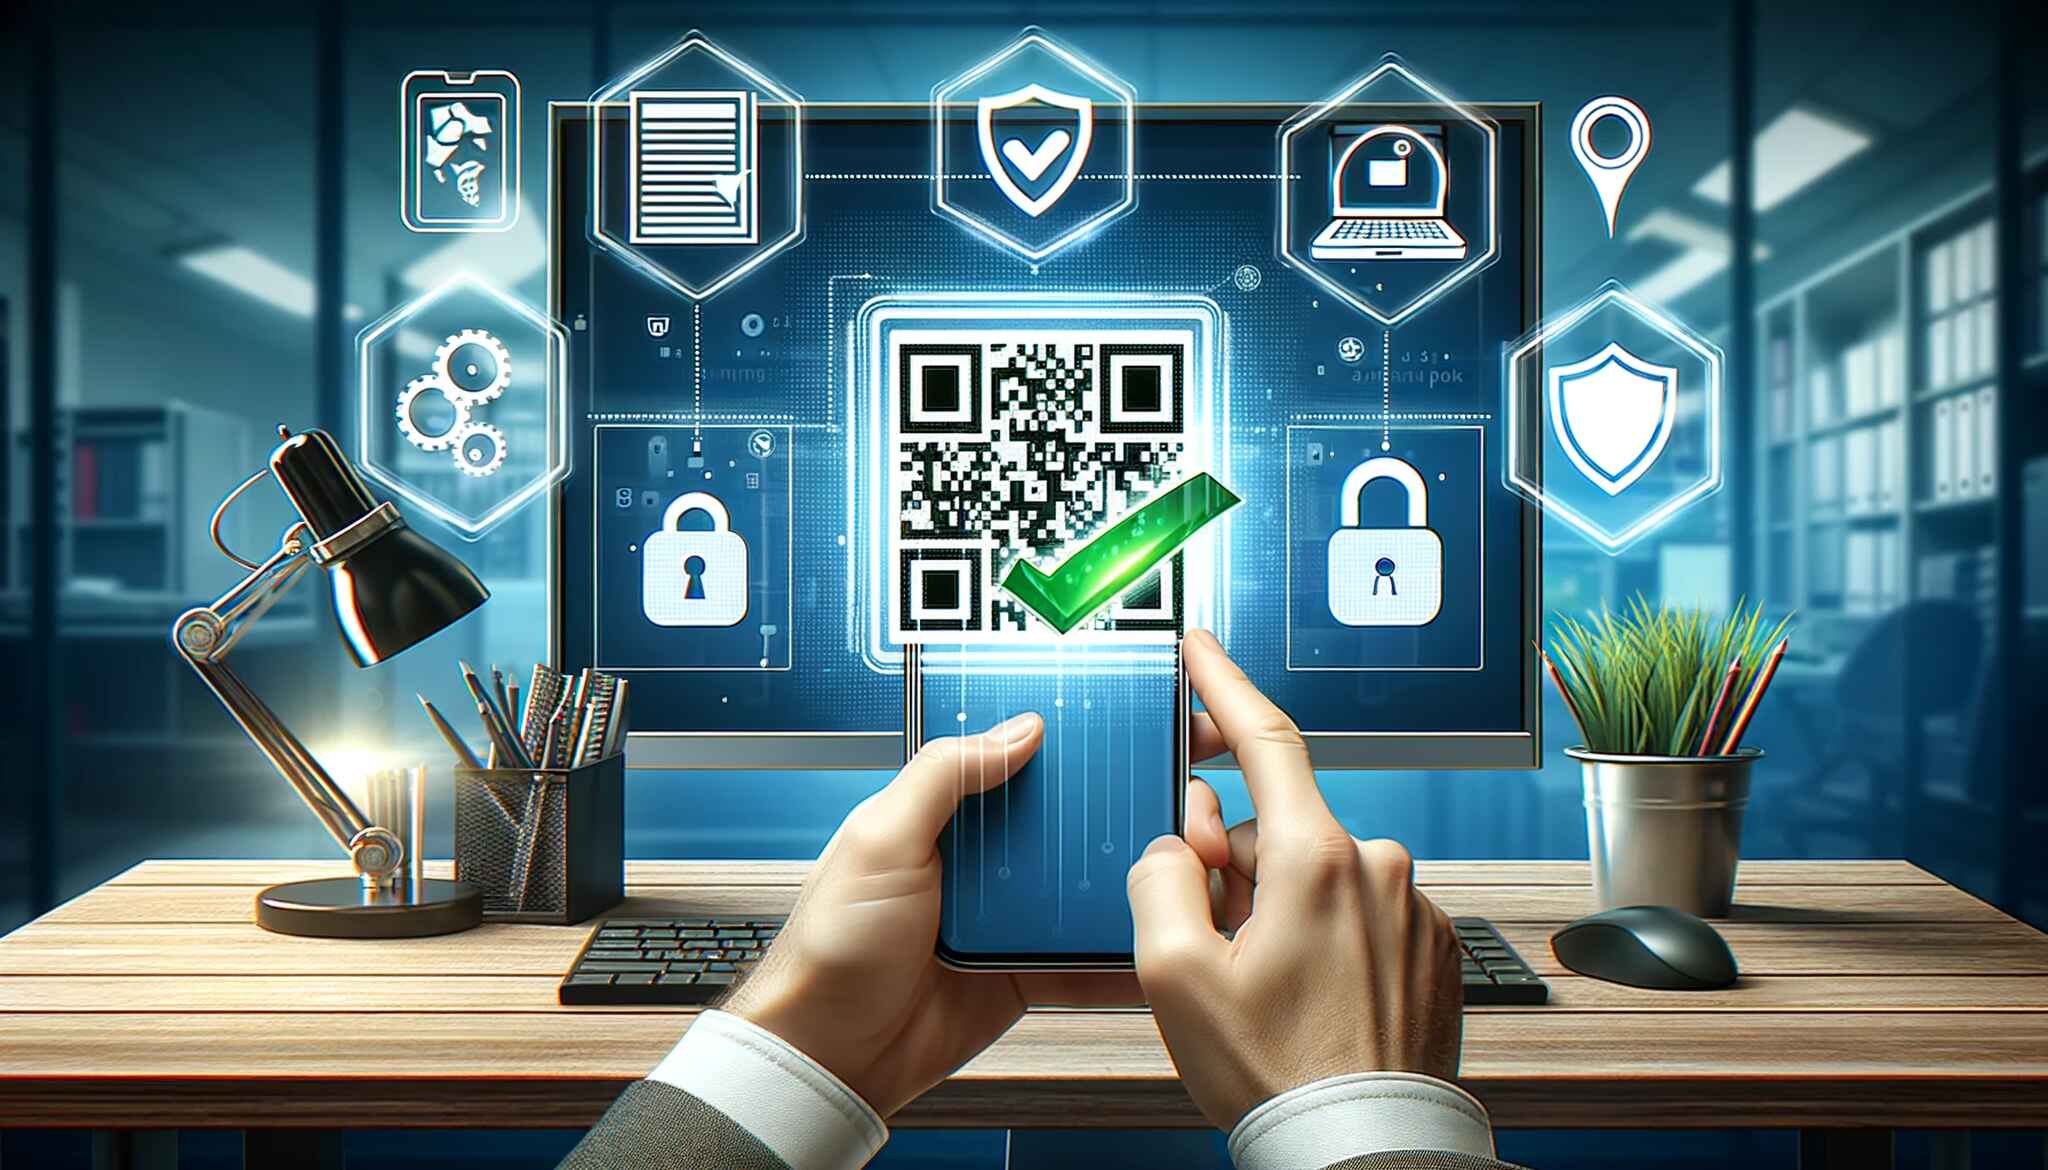 An illustration depicting the process of checking the safety of a QR code along with security icons